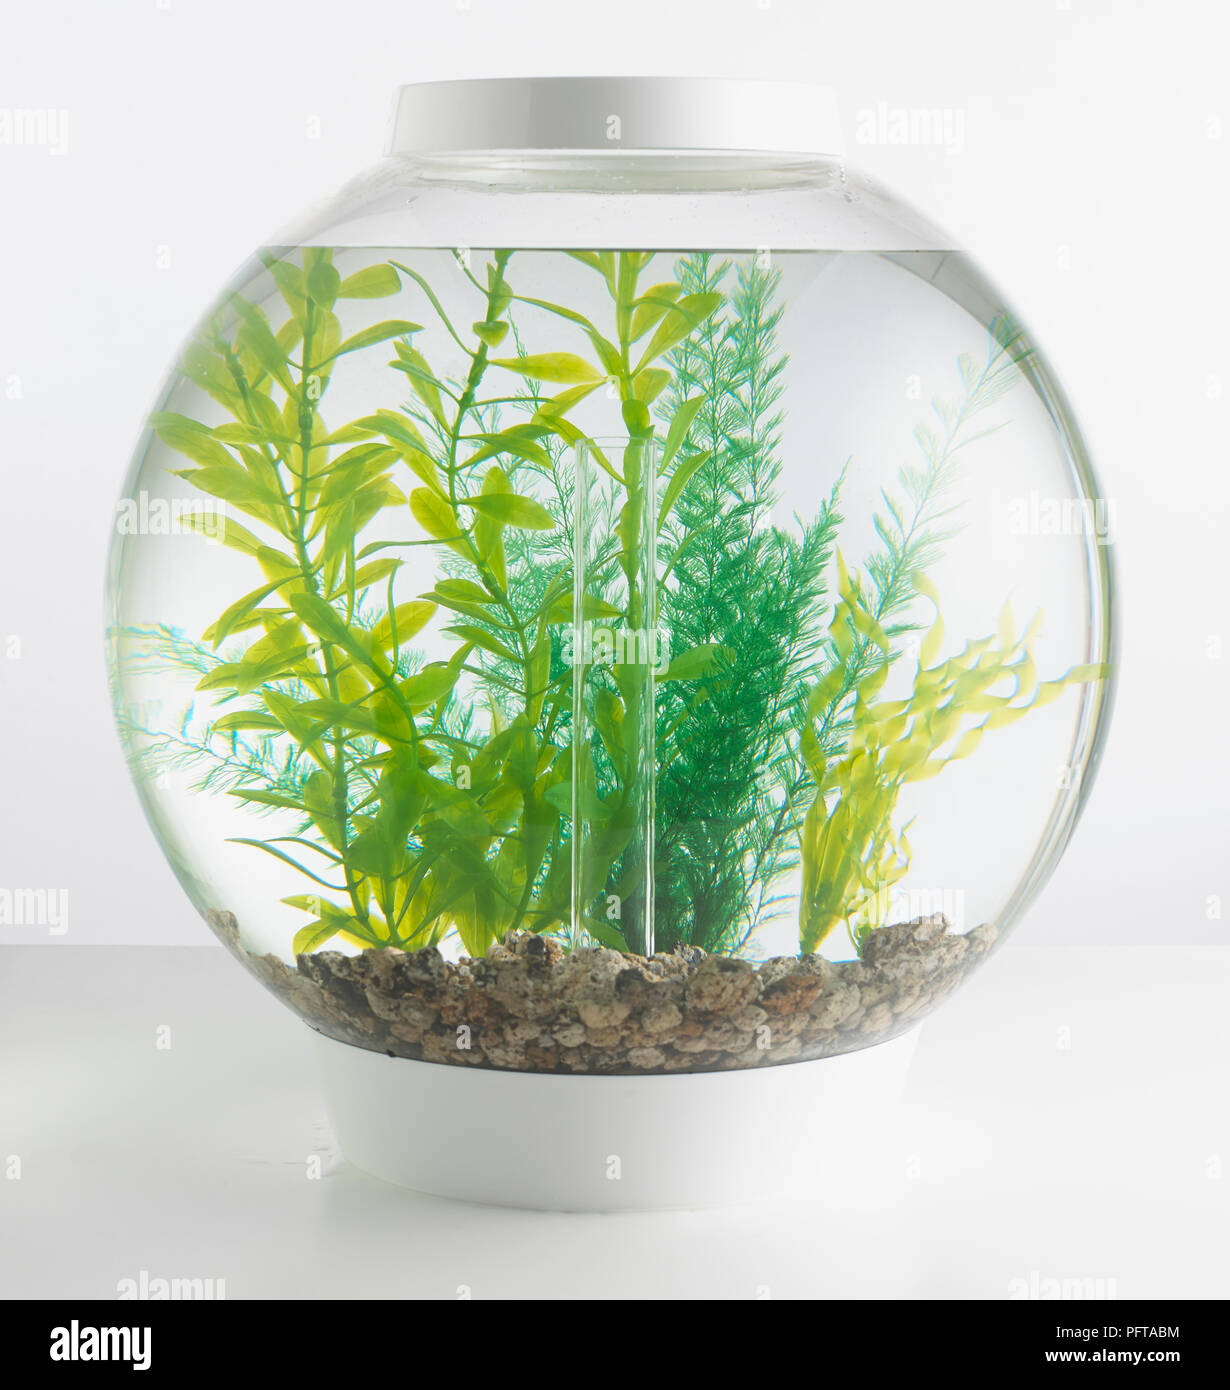 Goldfish bowl containing artificial plants Stock Photo